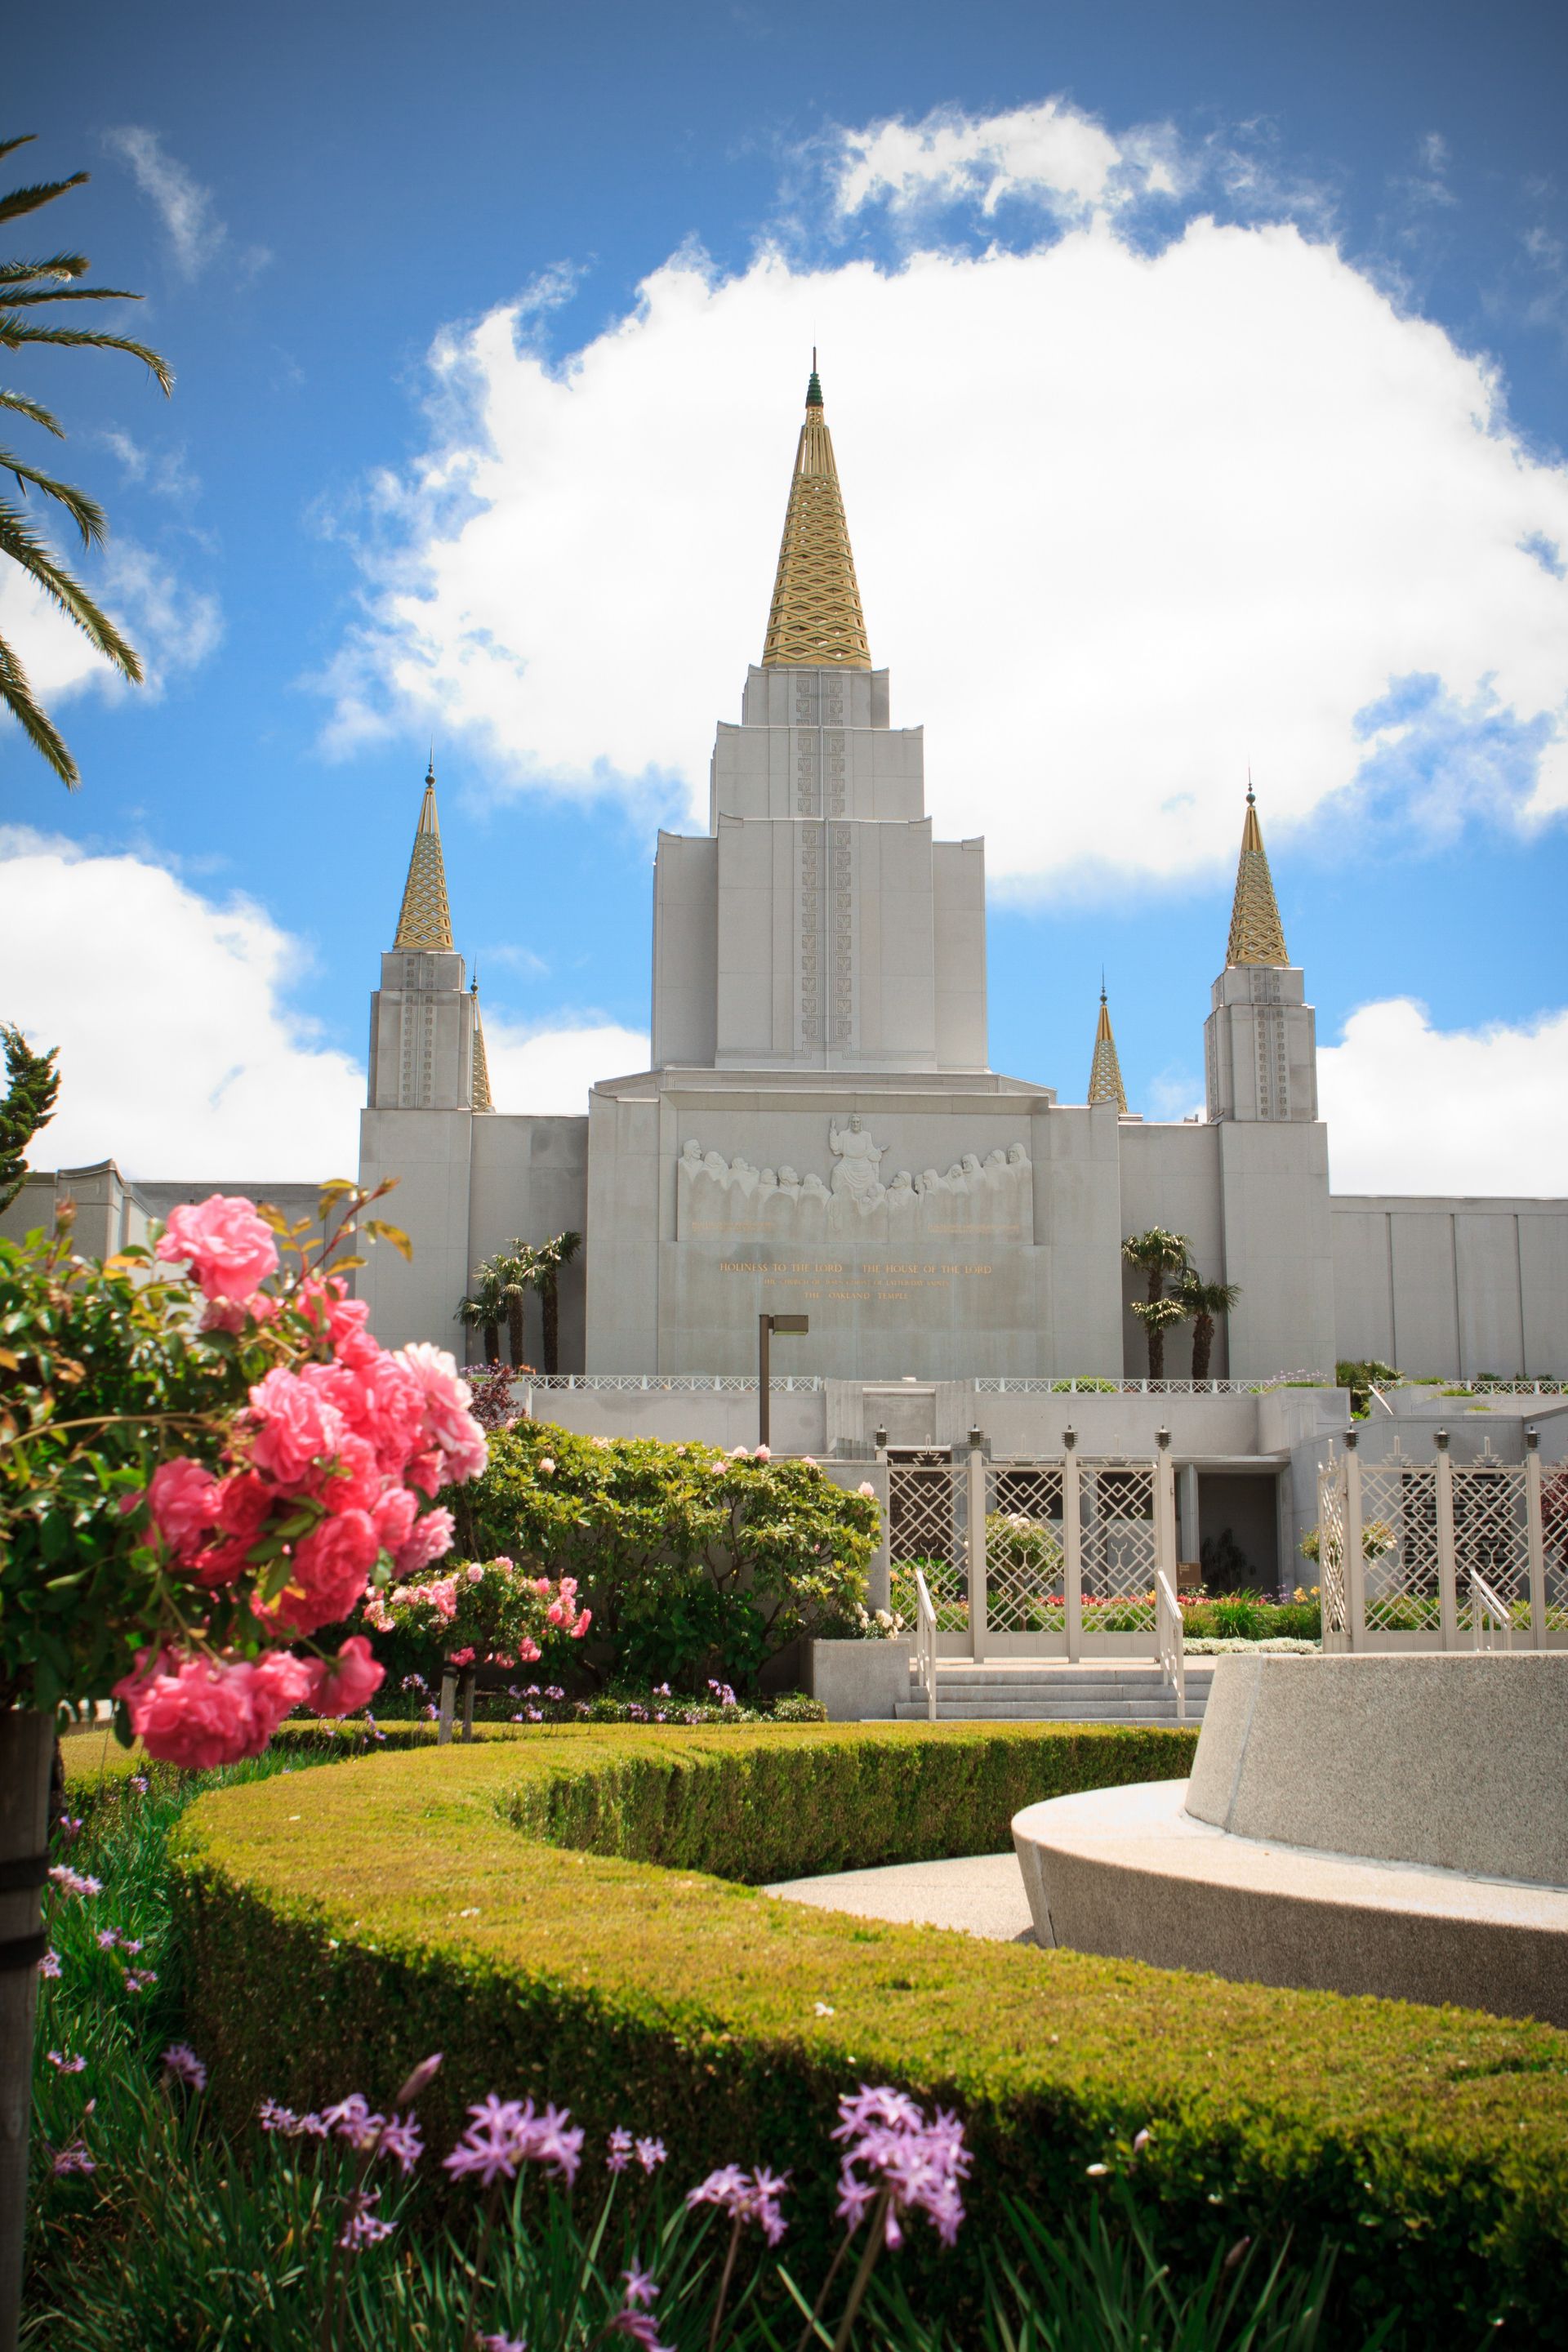 The Oakland California Temple, including the entrance and scenery.